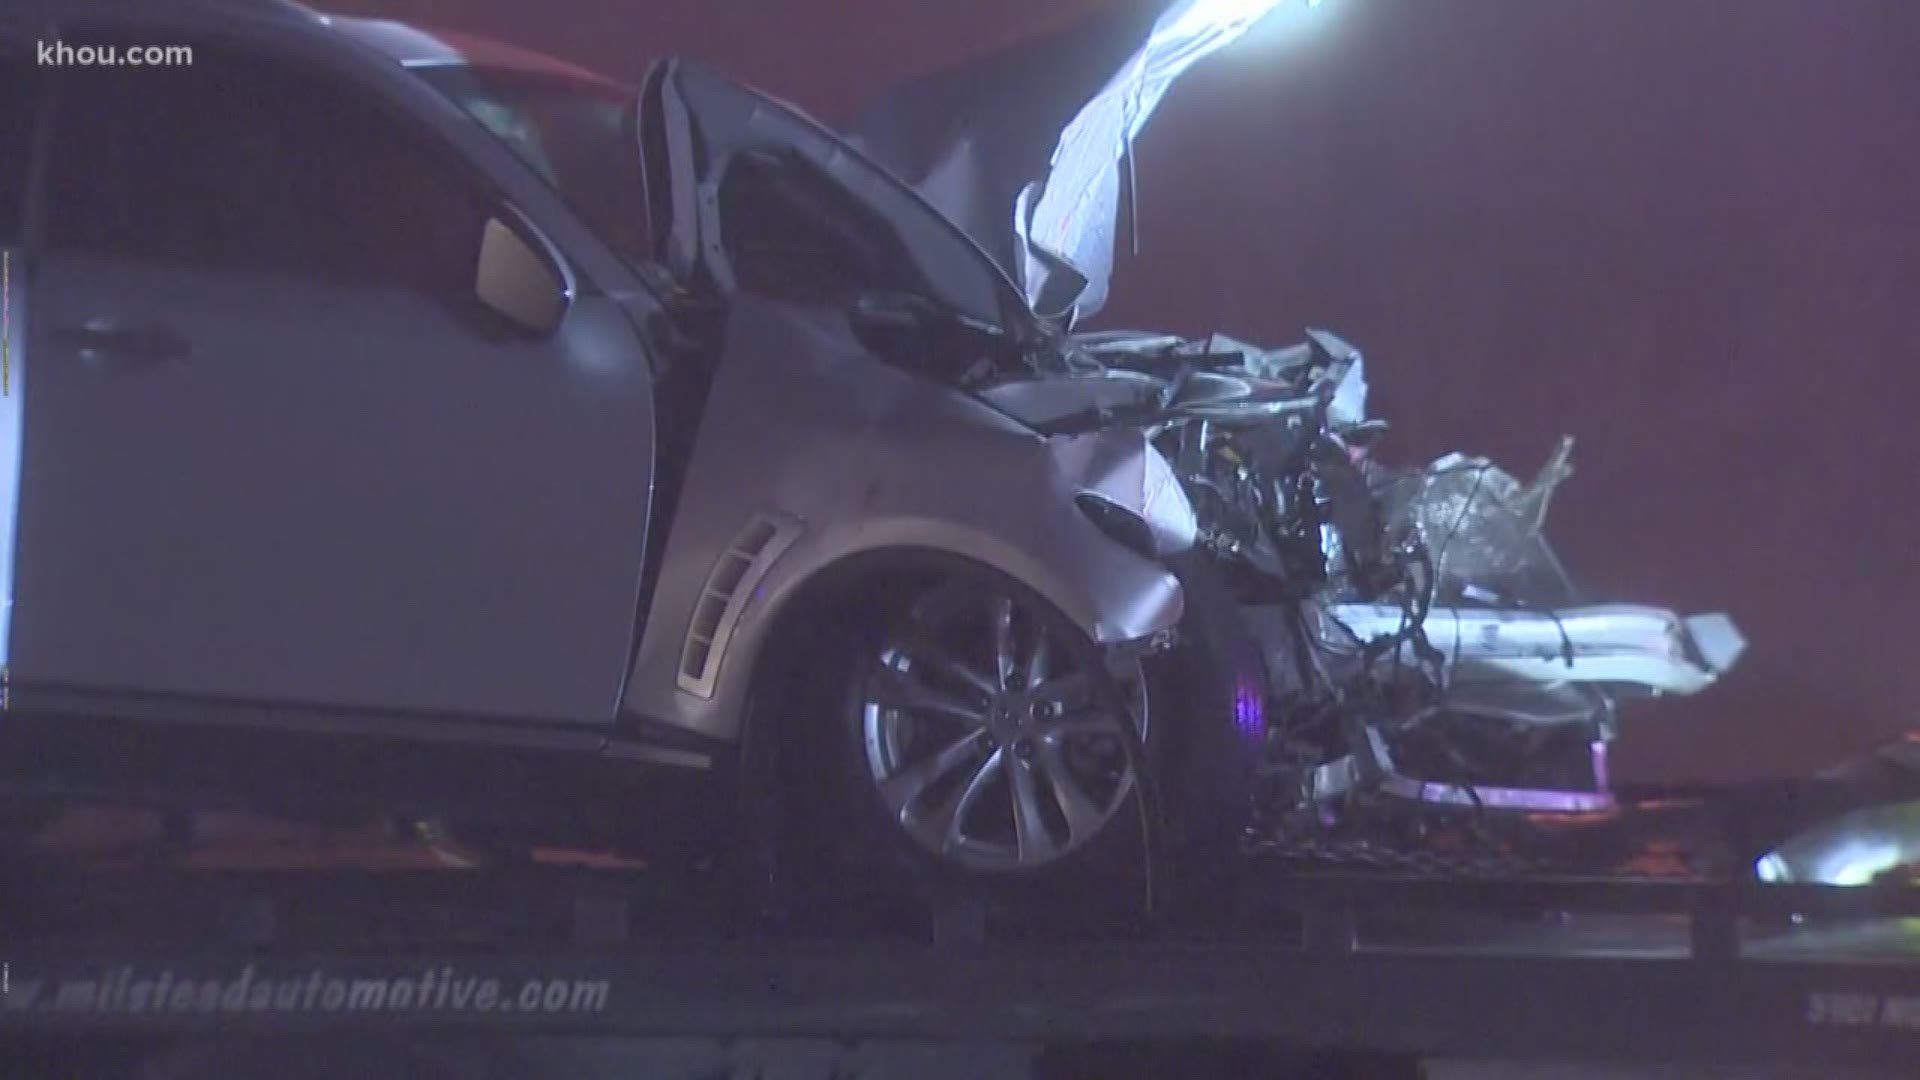 One person is dead after an SUV slammed into the back of an 18-wheeler stopped at an intersection on North Sam Houston Parkway overnight.